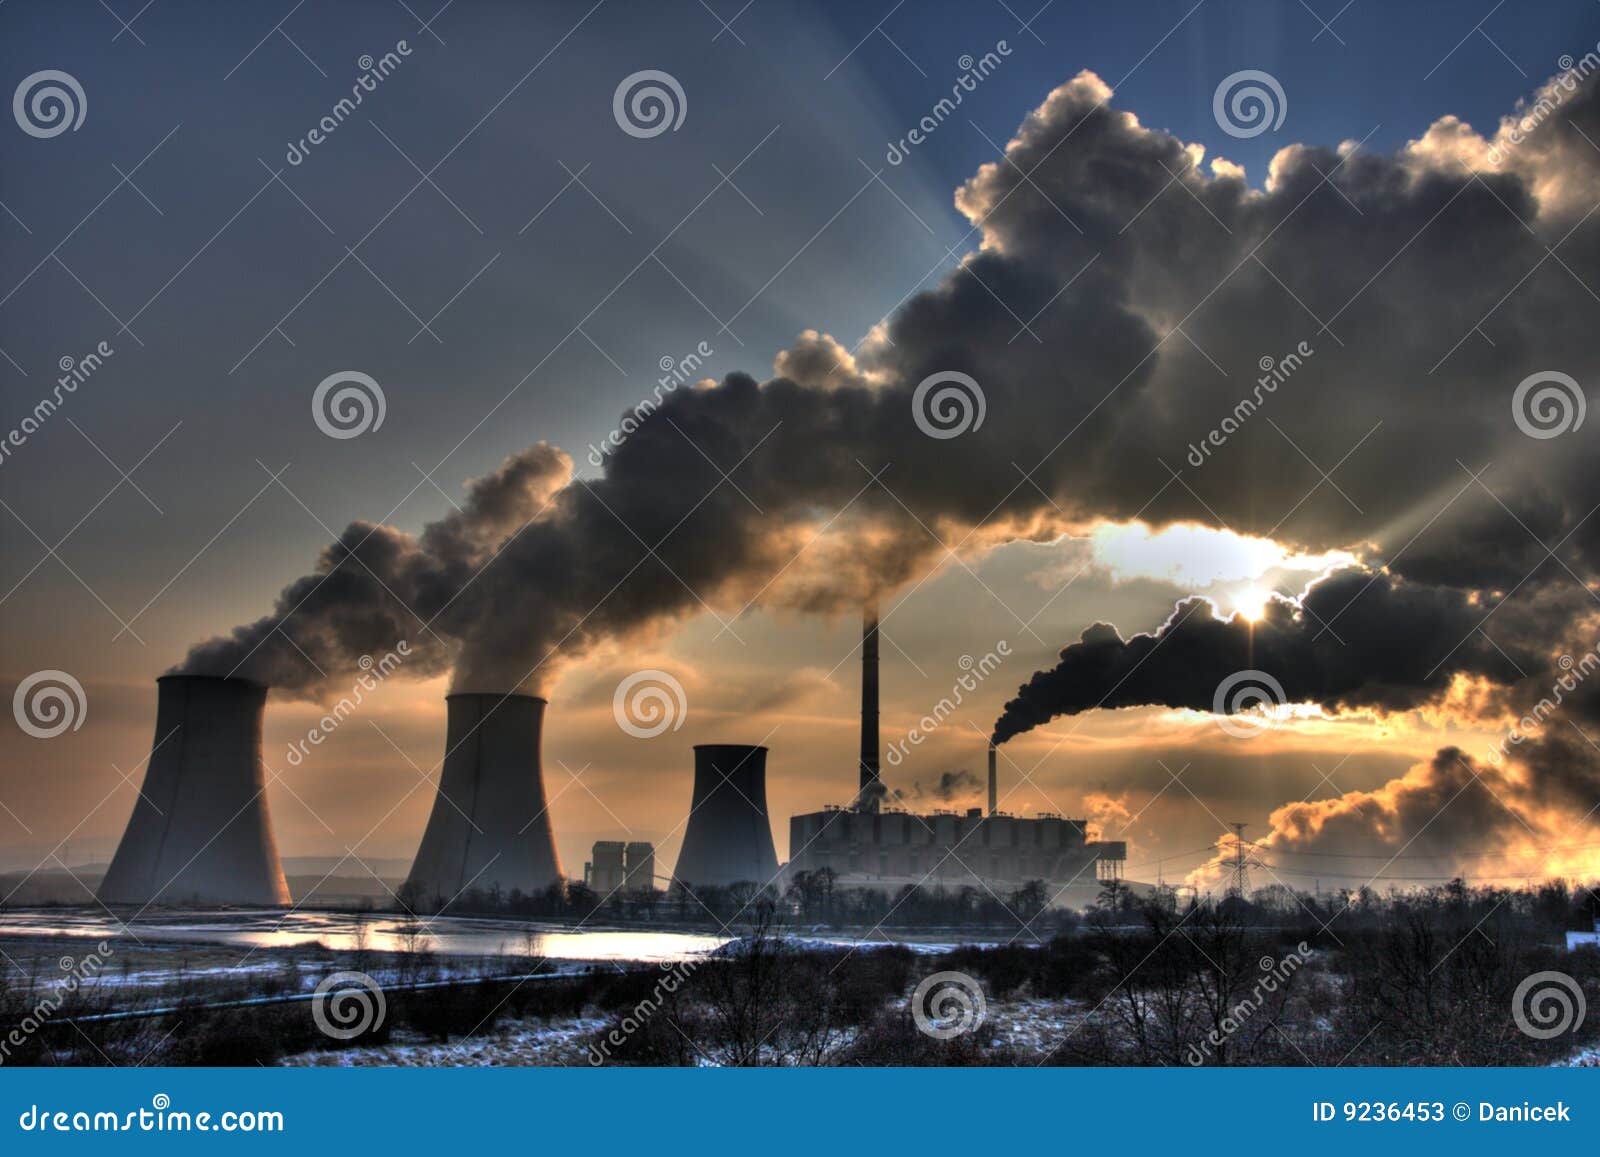 coal powerplant view - chimneys and fumes